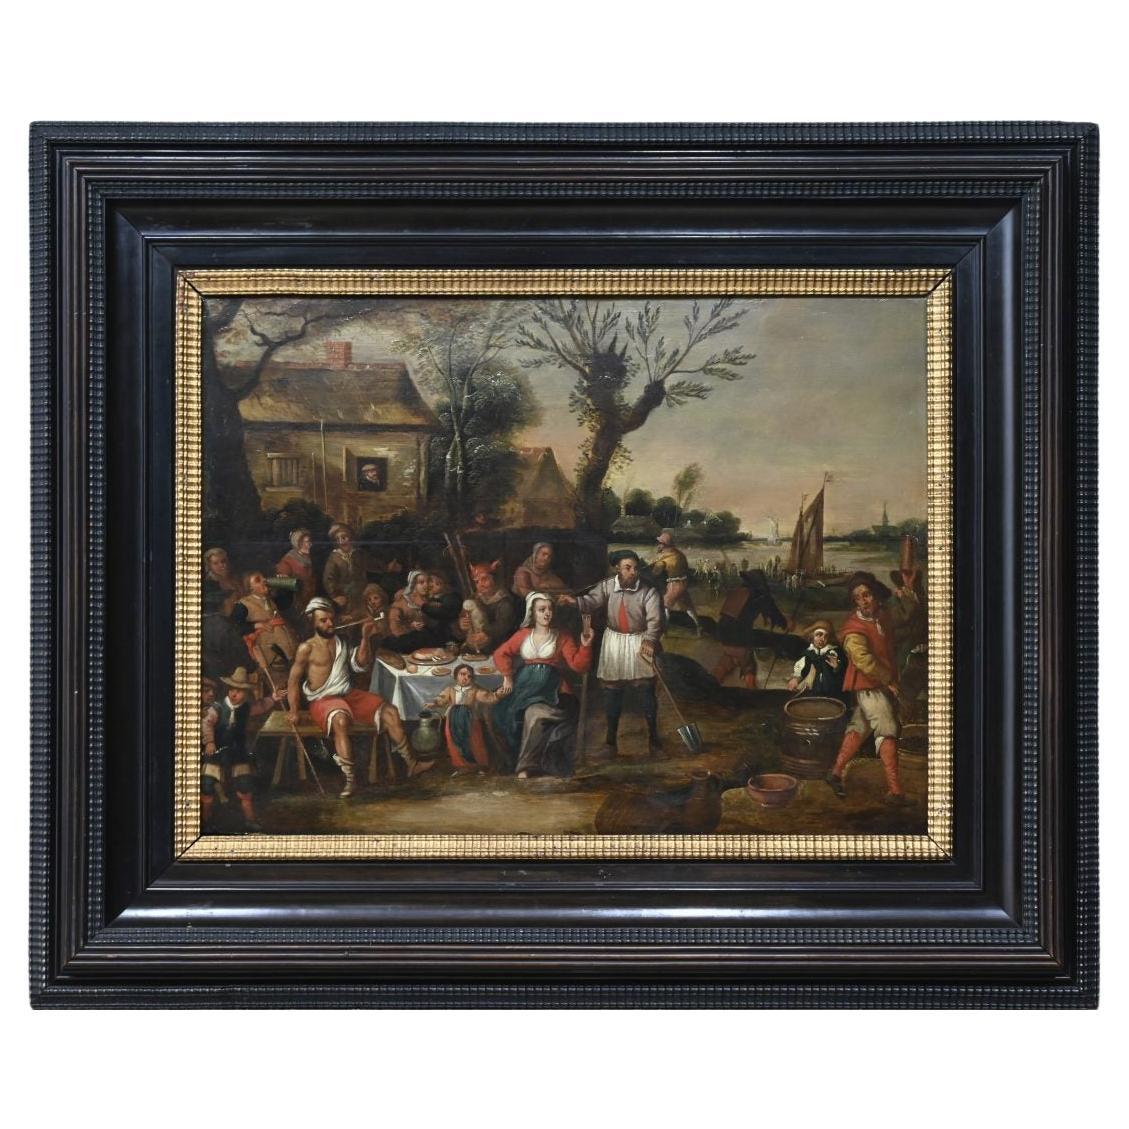 Follower of David Teniers the Younger, Oil on Panel of a Village Feast